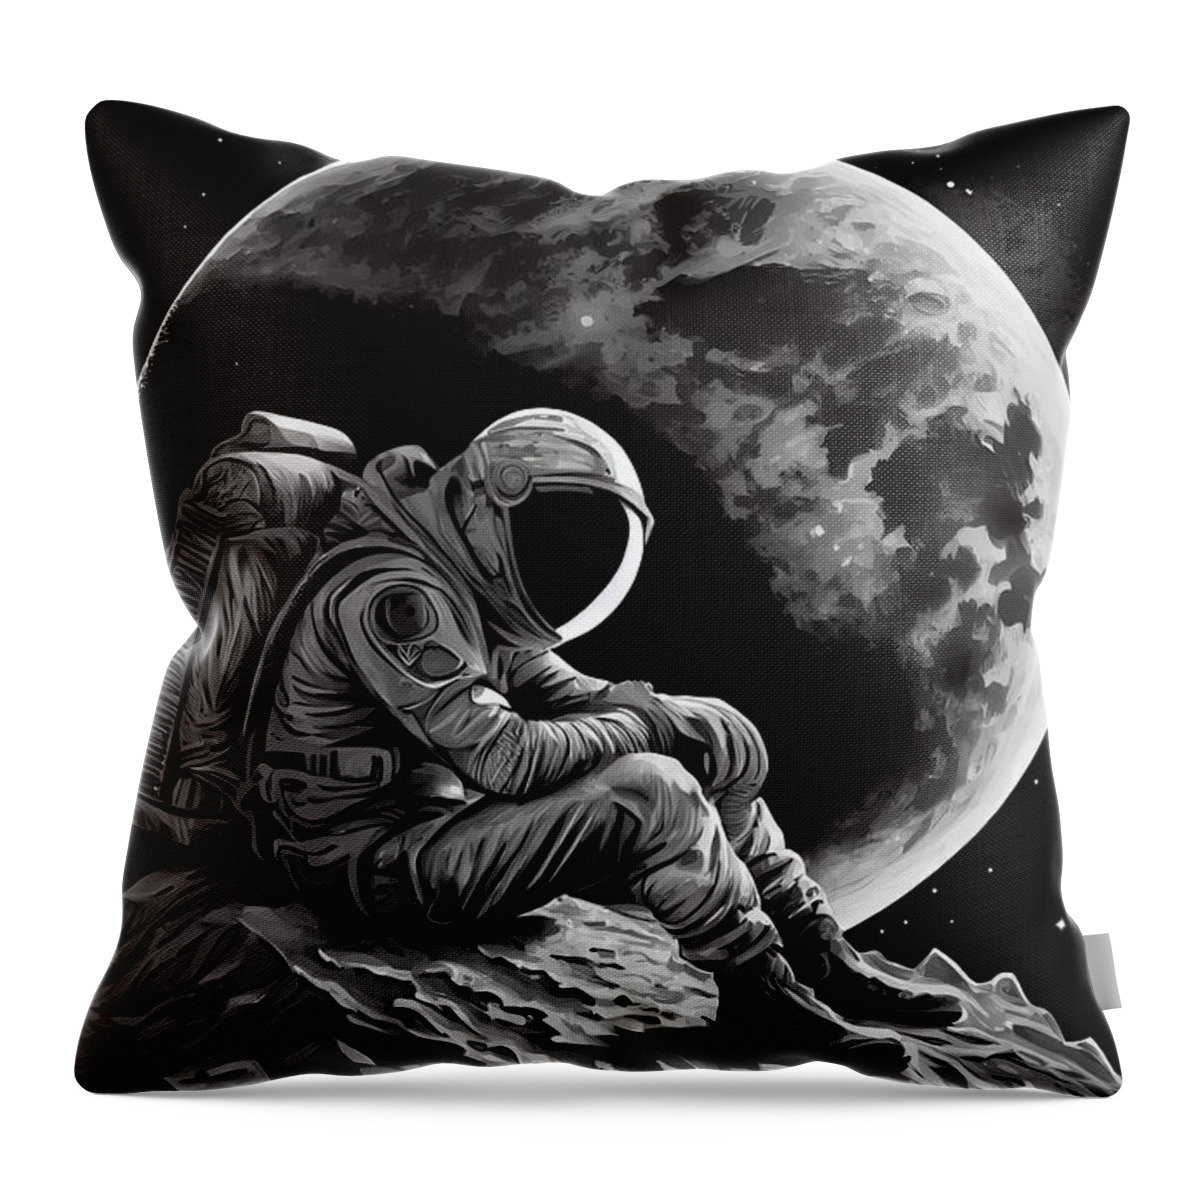 Astronaut Throw Pillow featuring the painting Alone by N Akkash